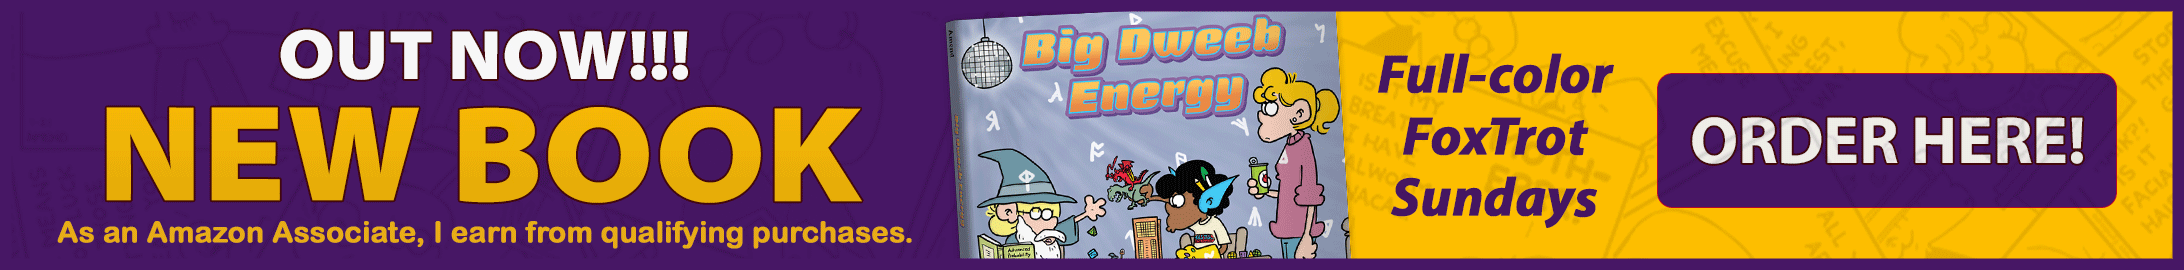 New FoxTrot Book! Big Dweeb Energy: A FoxTrot Collection by Bill Amend - BUY HERE